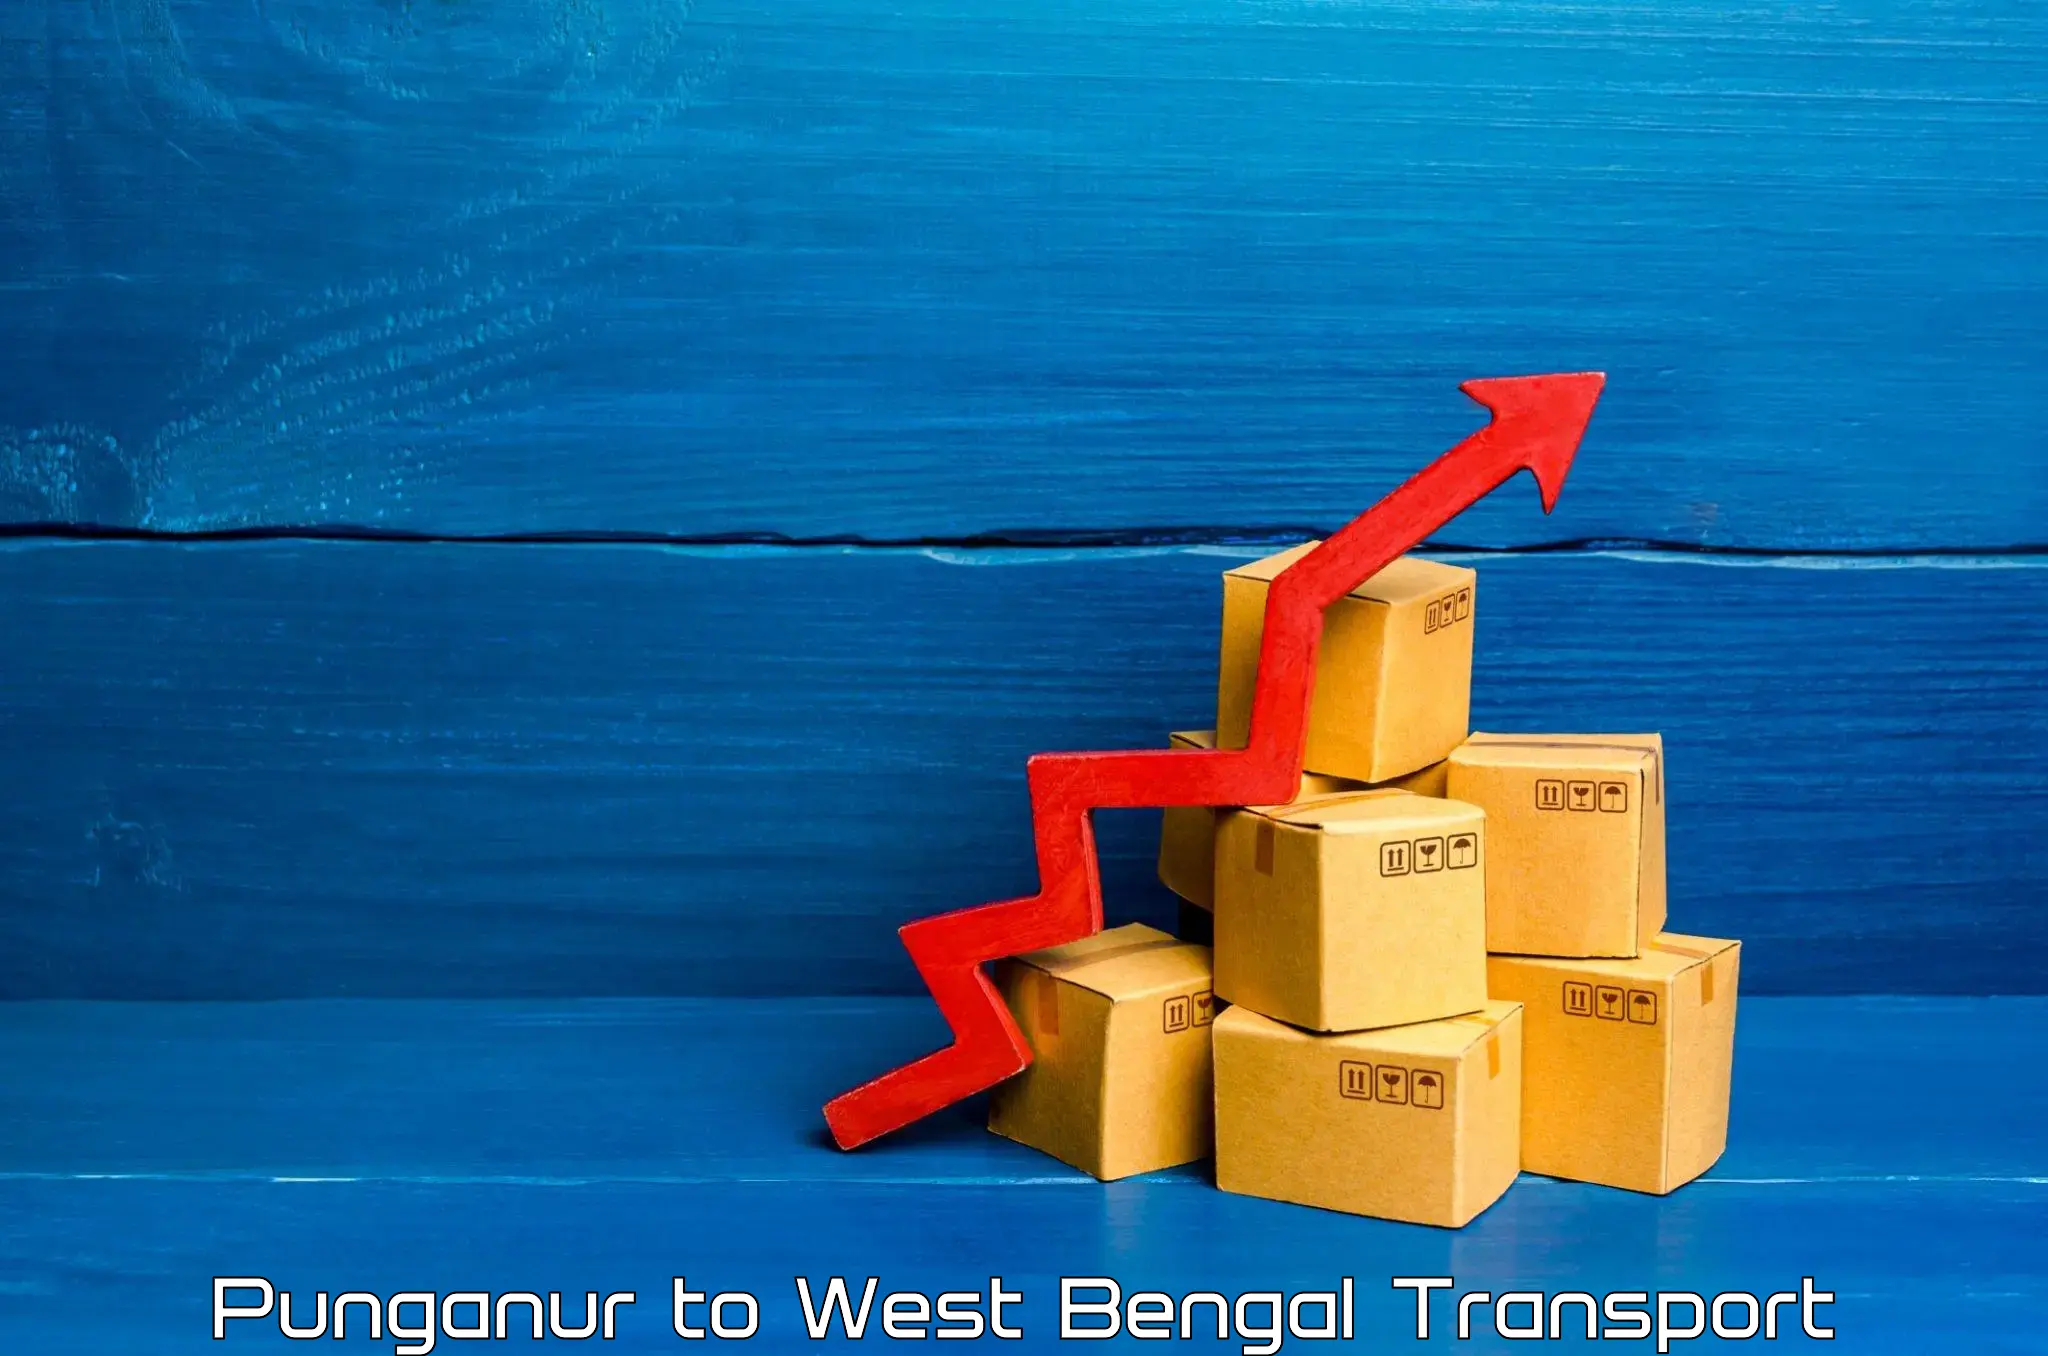 Truck transport companies in India Punganur to West Bengal